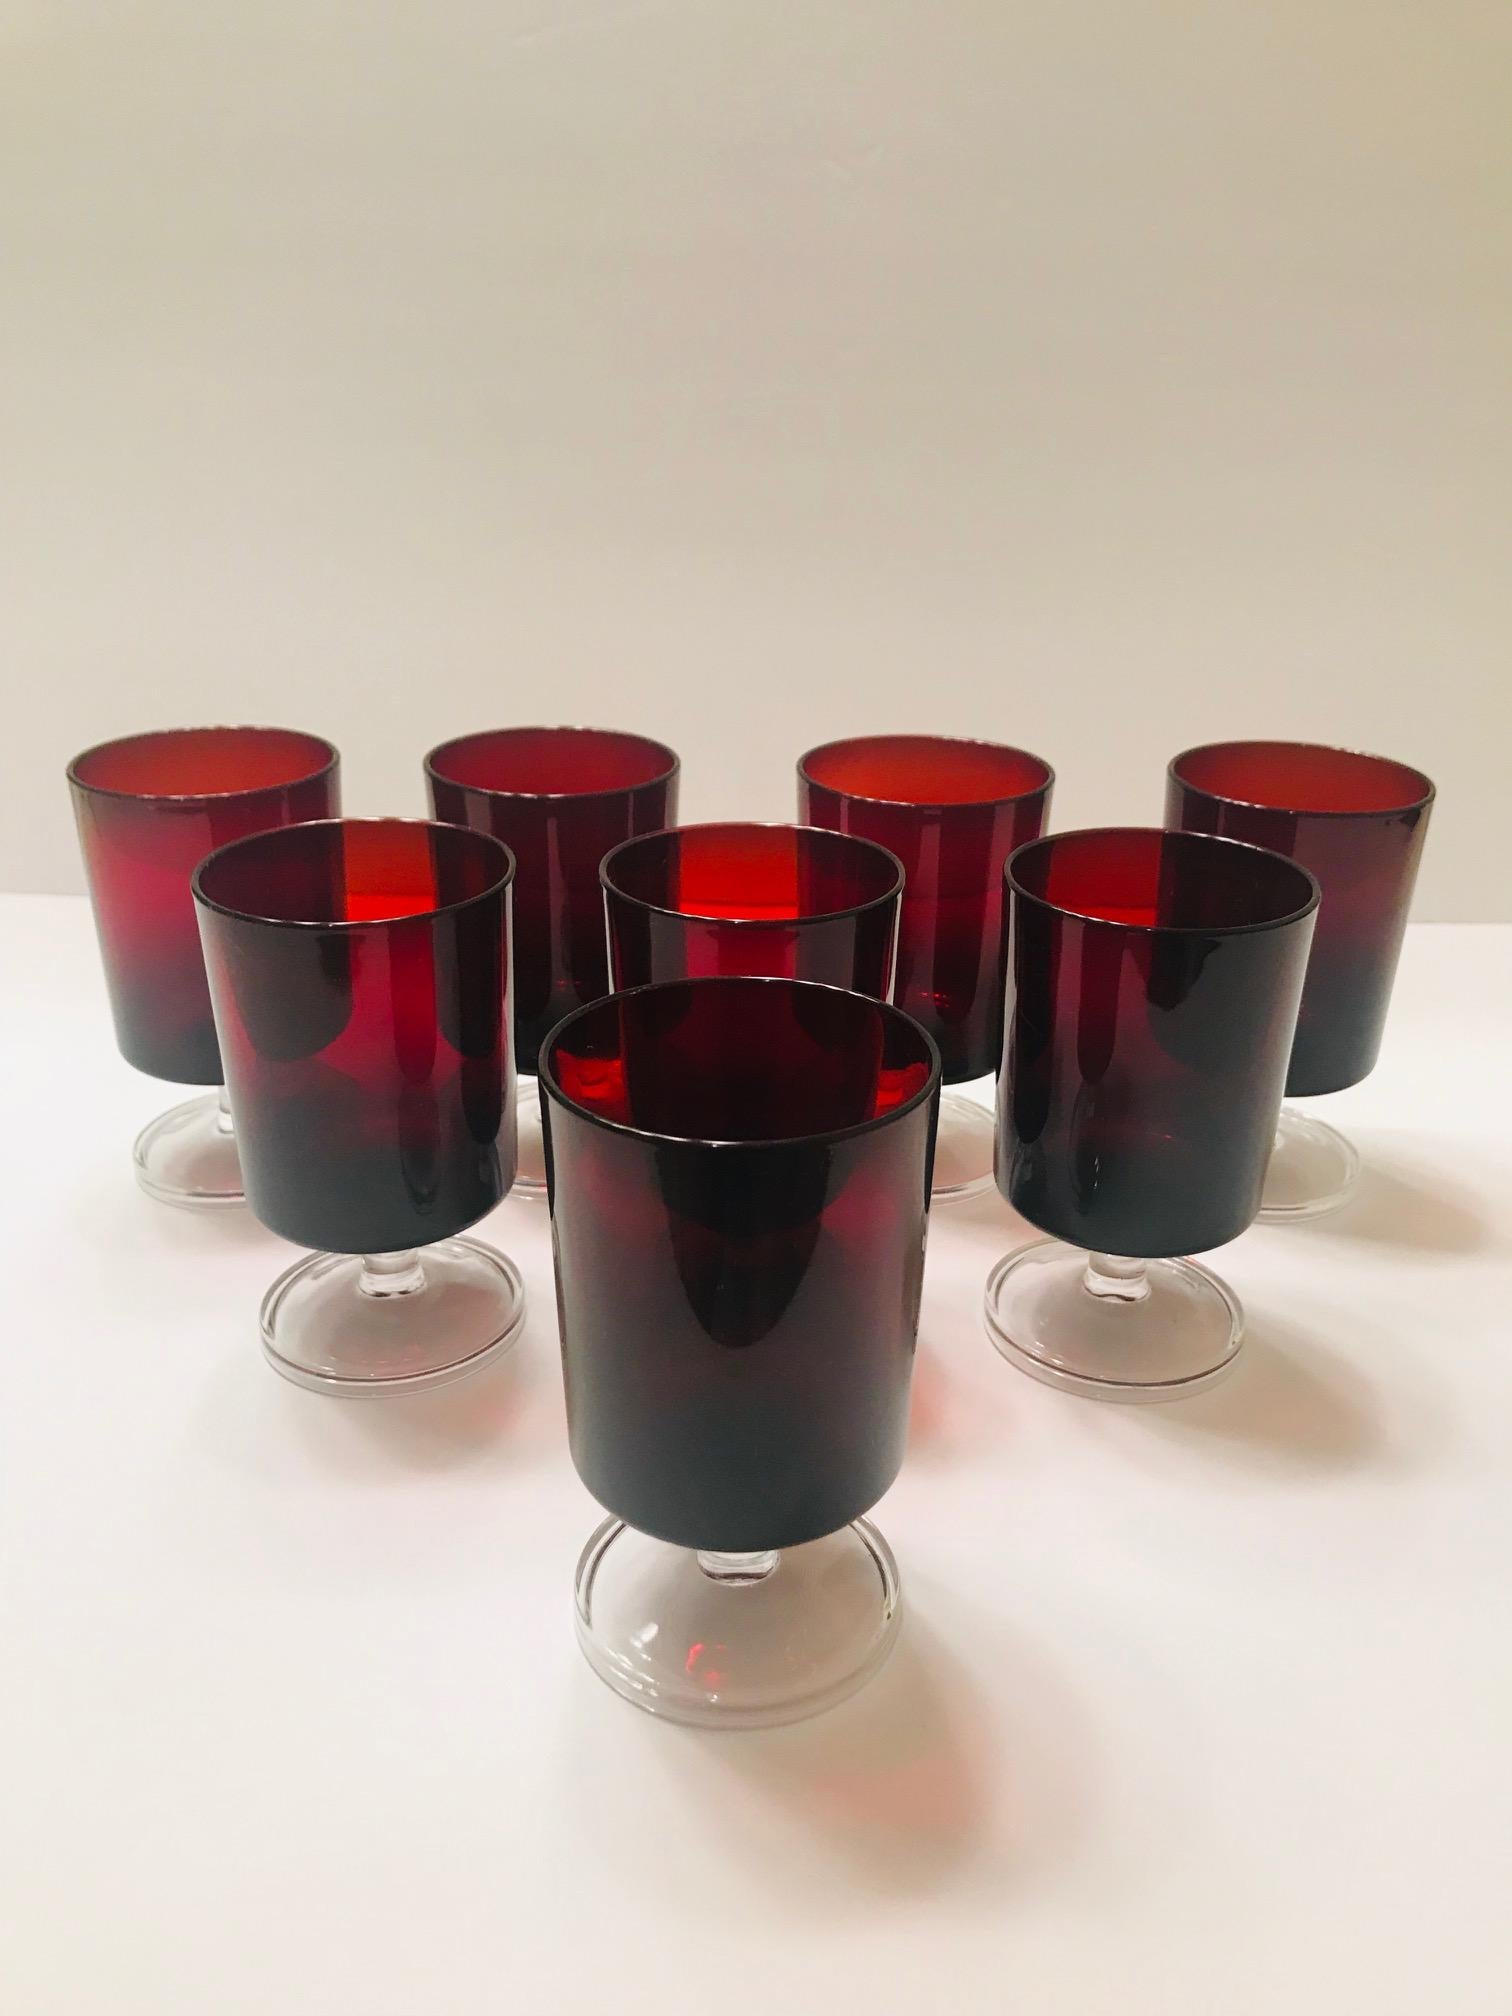 Set of eight French vintage crystal wine or liquor glasses in jewel tone red with clear glass stems. Glasses have Minimalist design with cylinder forms. Stamped 